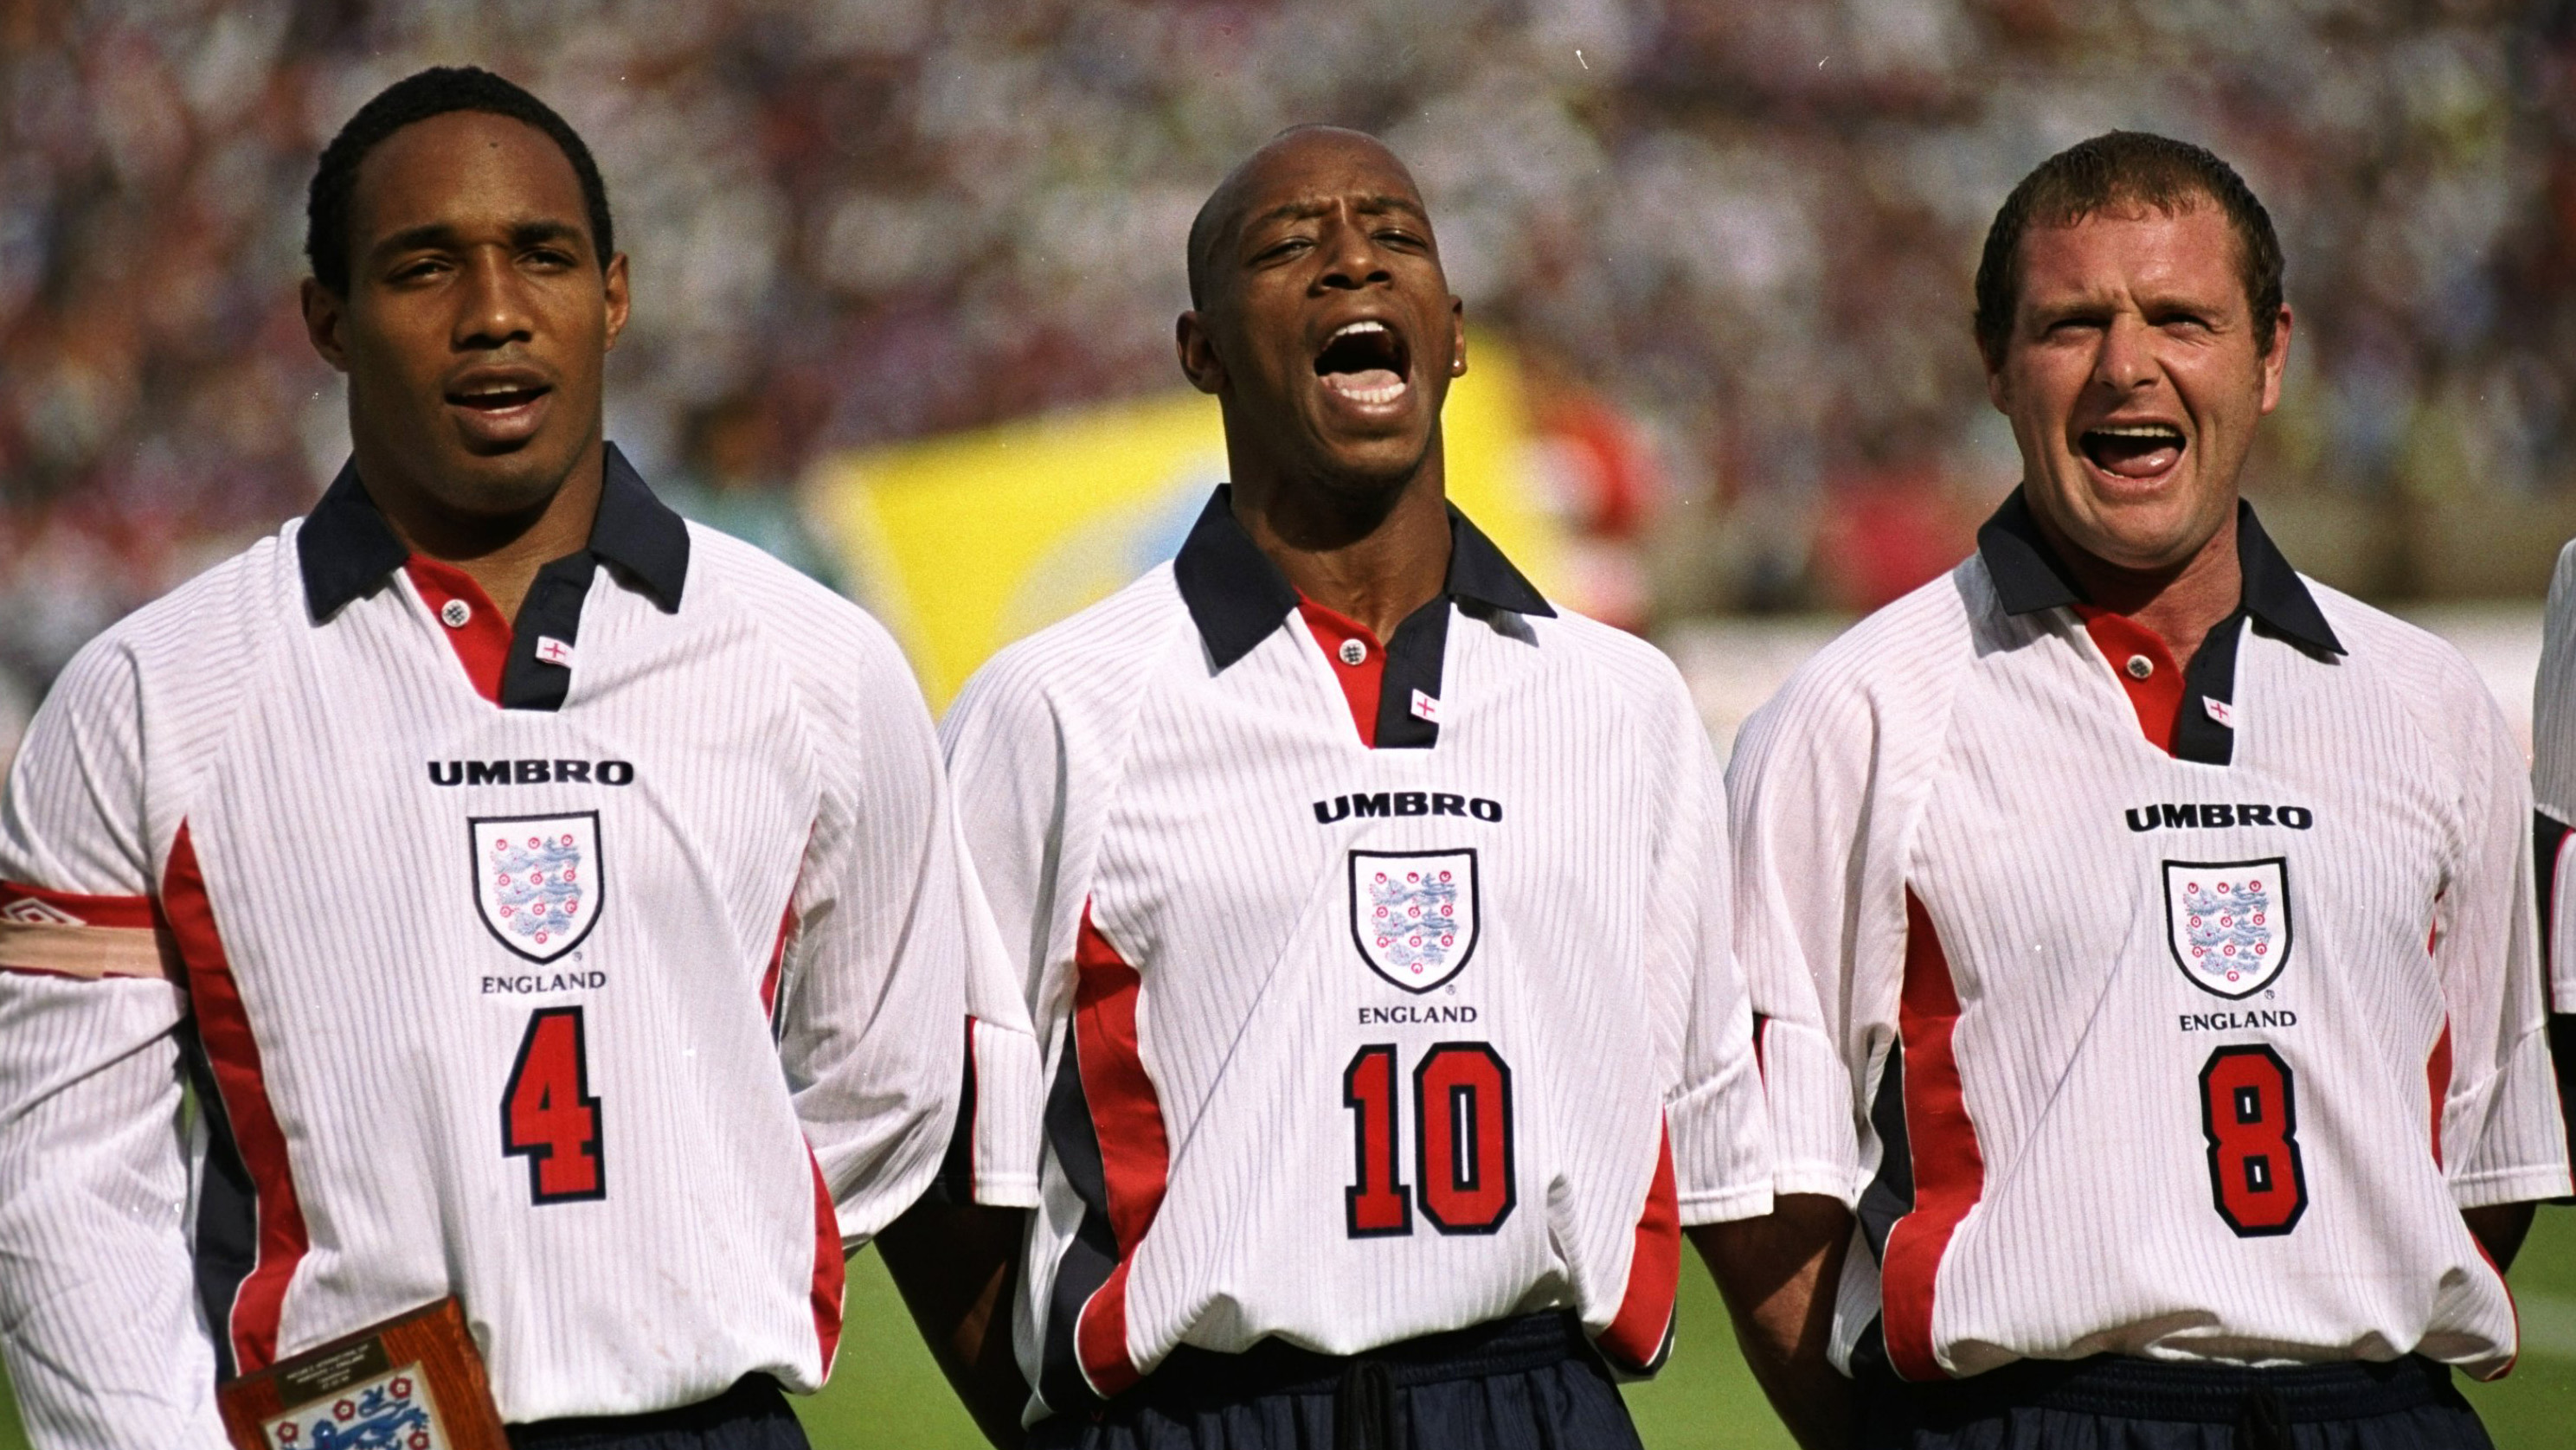 Paul Ince with Ian Wright and Paul Gascoigne in 1998